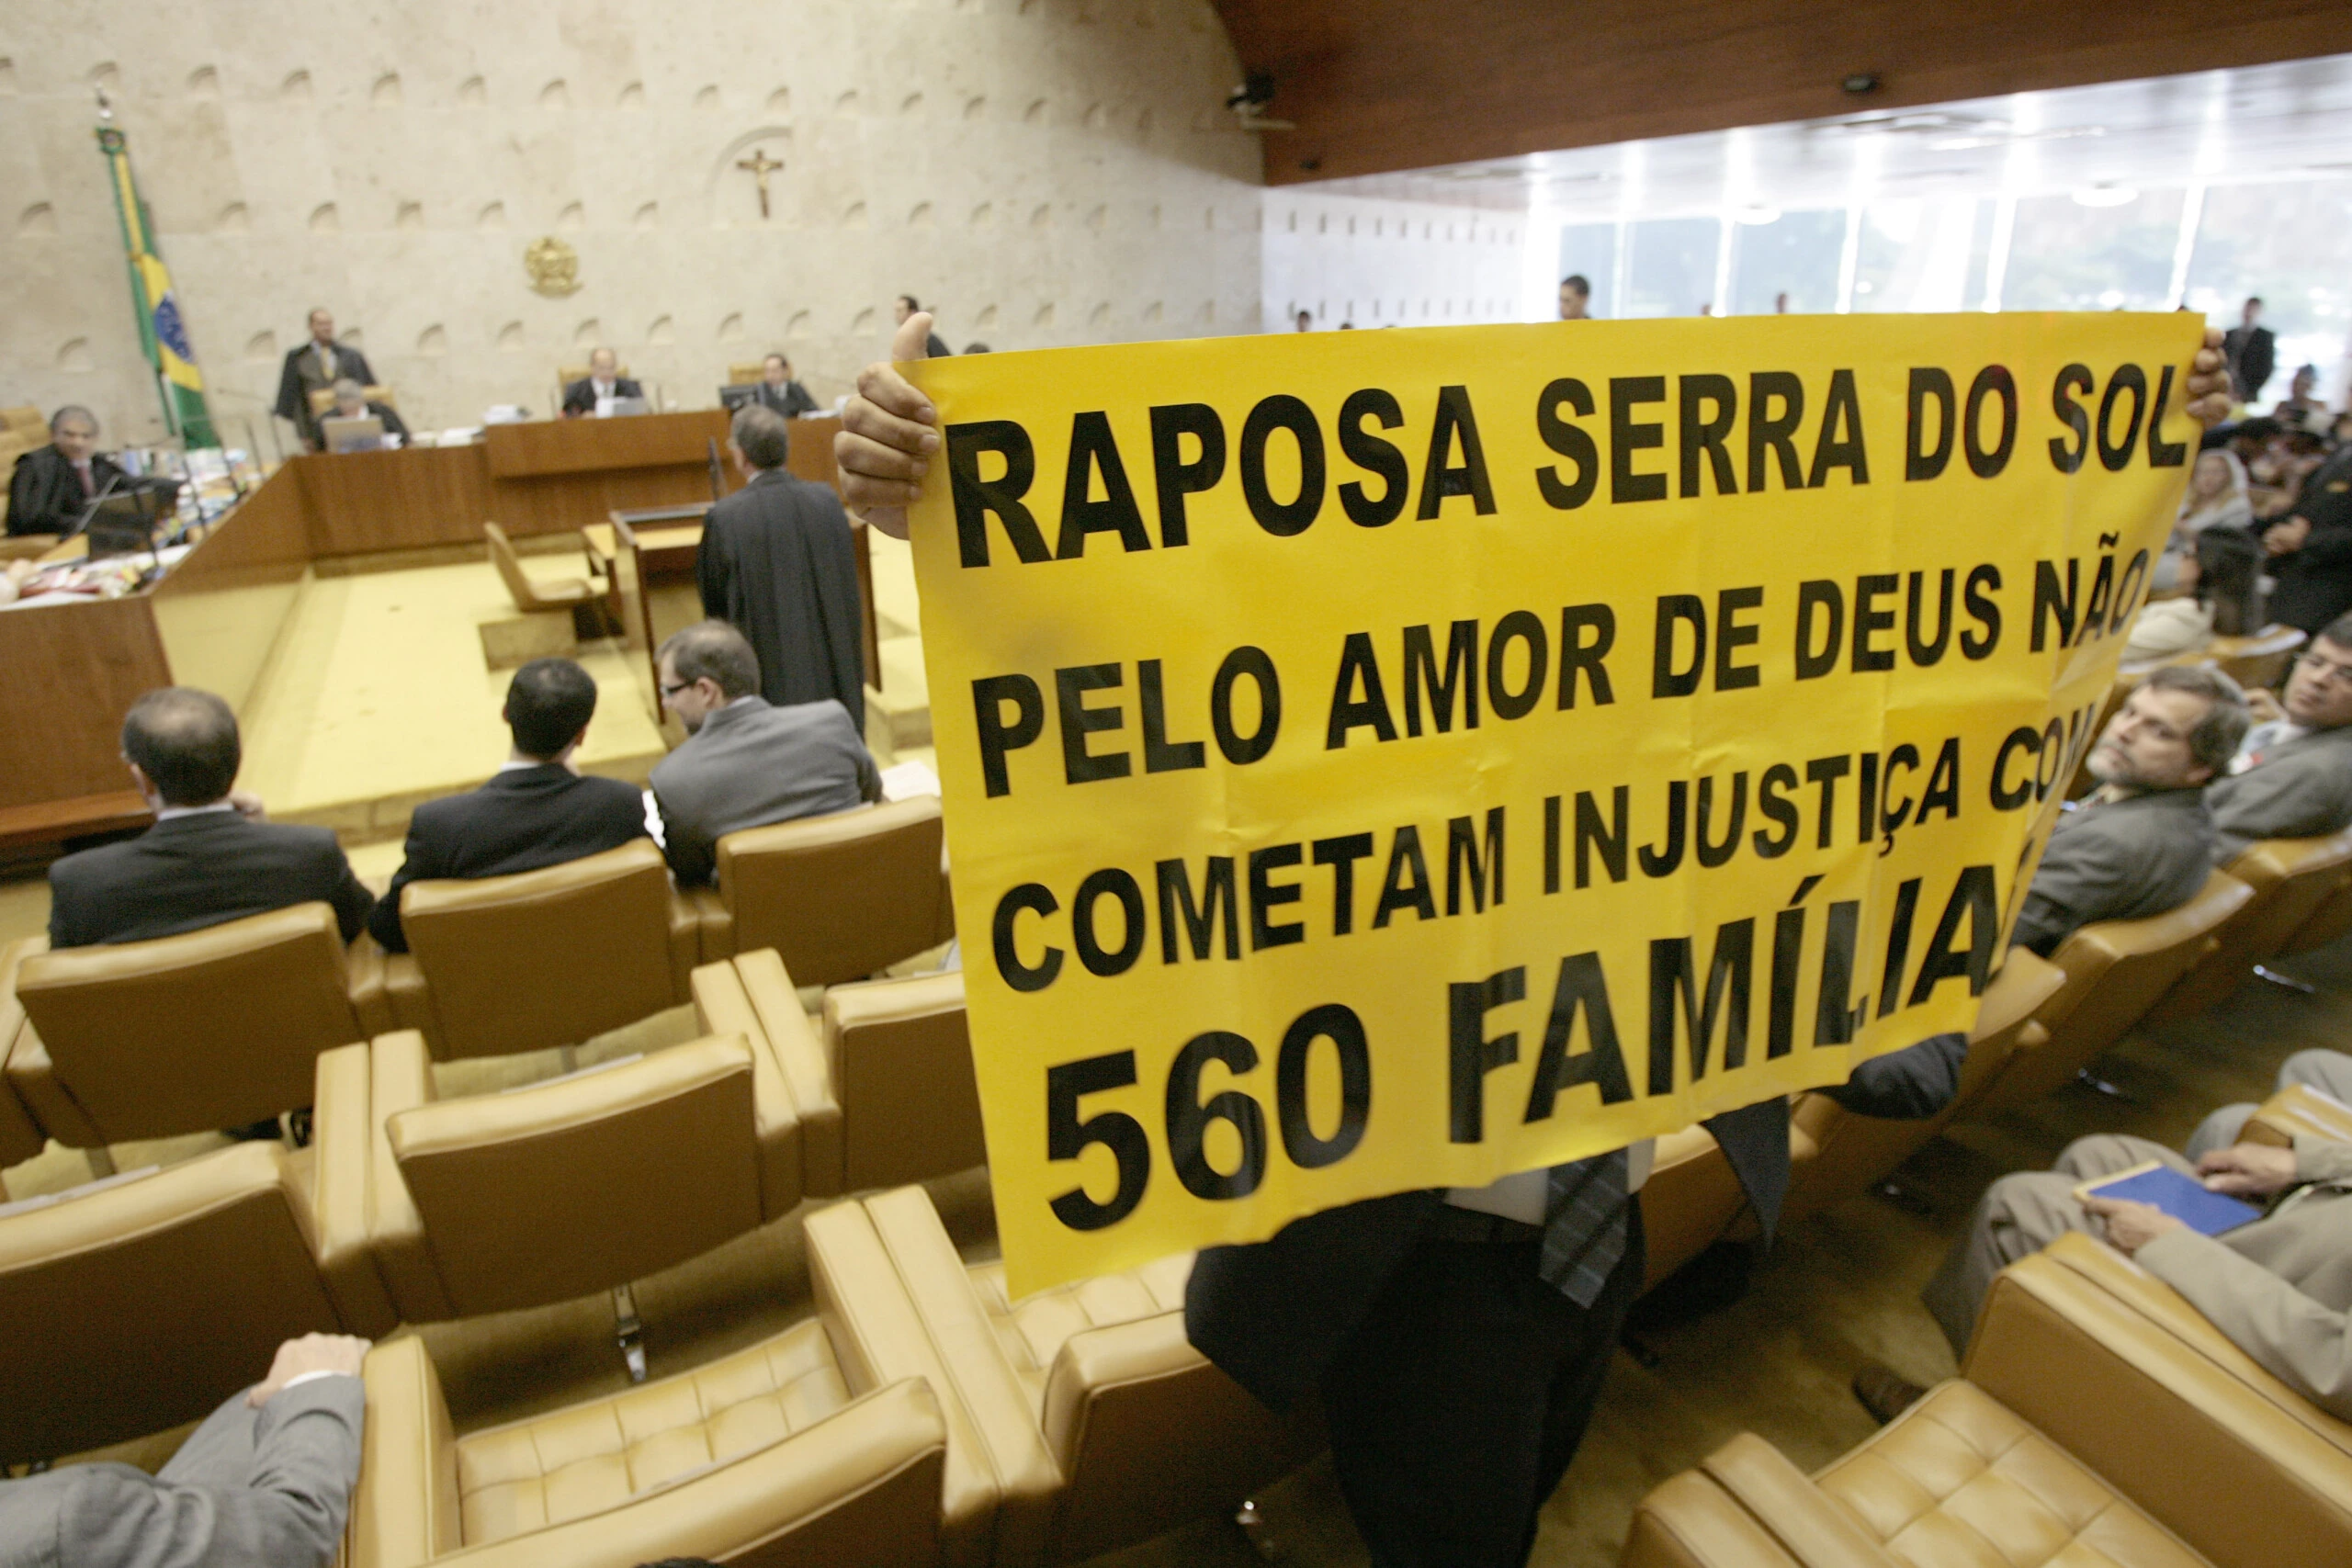 A representative of a group of farmers who oppose a resolution of Brazil's Supreme Court, confirming that the Raposa Serra do Sol reservation in northern Brazil must remain intact, holds a sign during a court's session in Brasilia, Thursday, March 19, 2009. The court ruled Thursday that the reservation must remain intact, a ruling seen as bolstering indigenous rights, and which sets an important precedent for laying out and protecting the boundaries for many Indian reserves in Brazil.The sign reads in Portuguese: "Raposa Serra do Sol, for the love of God don't commit injustice for 560 families".(AP Photo/Eraldo Peres)